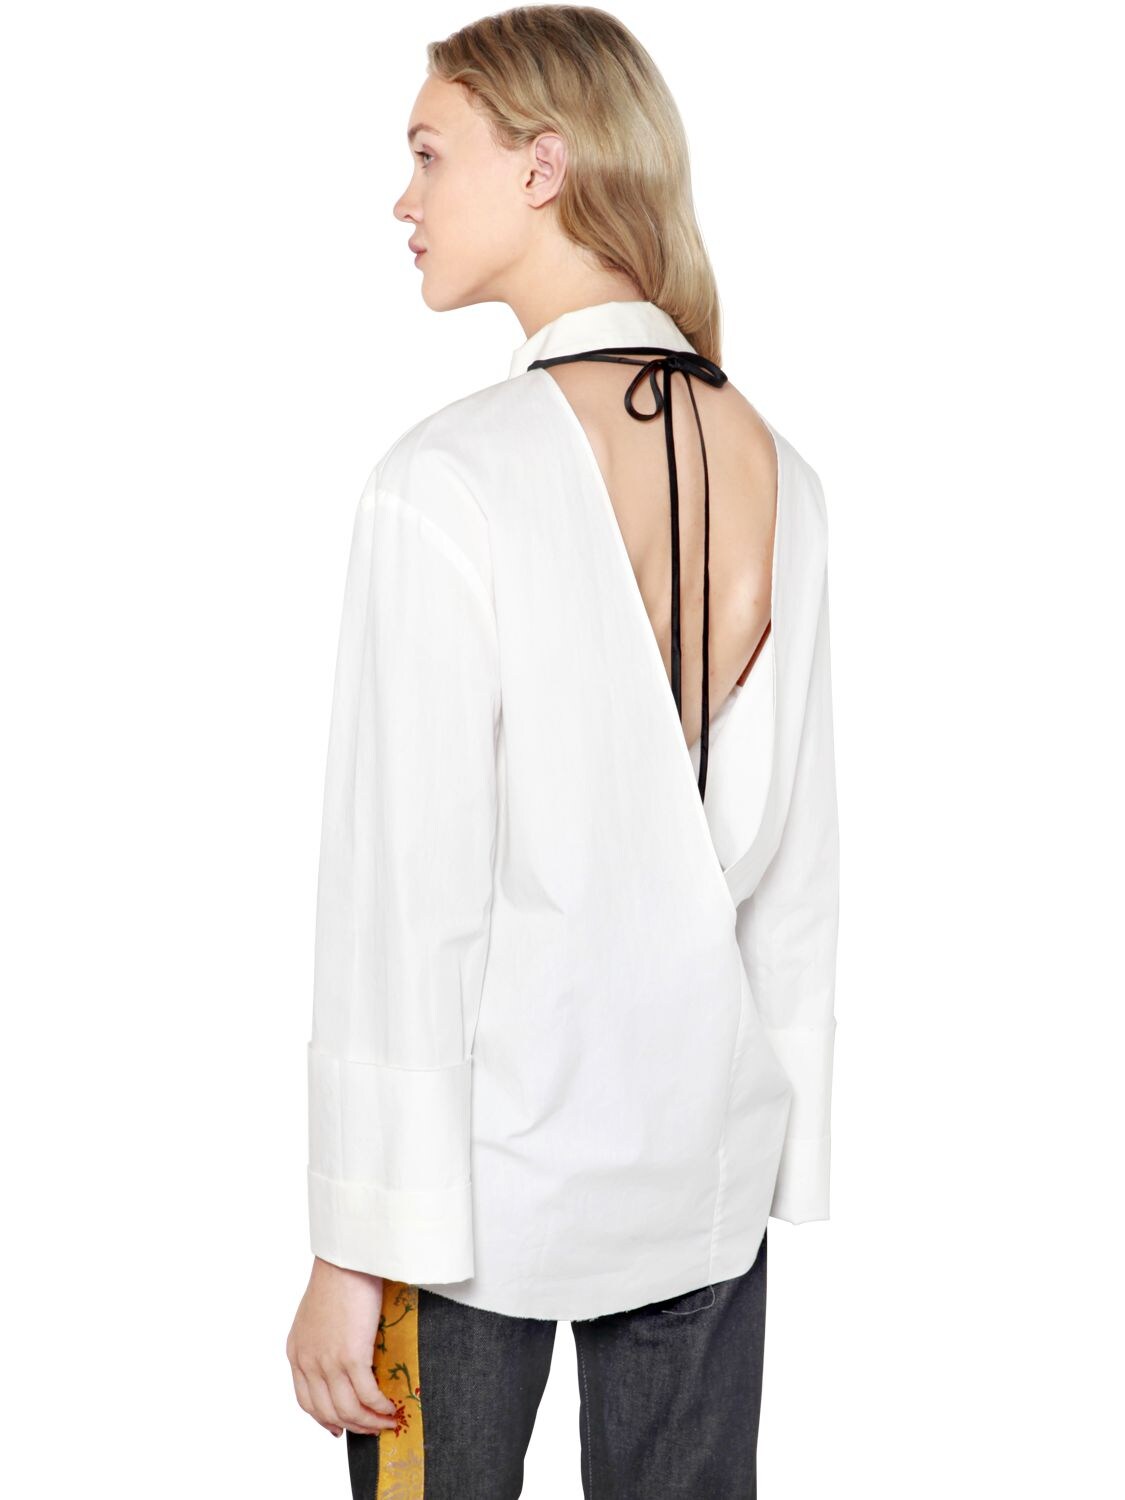 Act N°1 Safety Pin Cotton Poplin Shirt In White